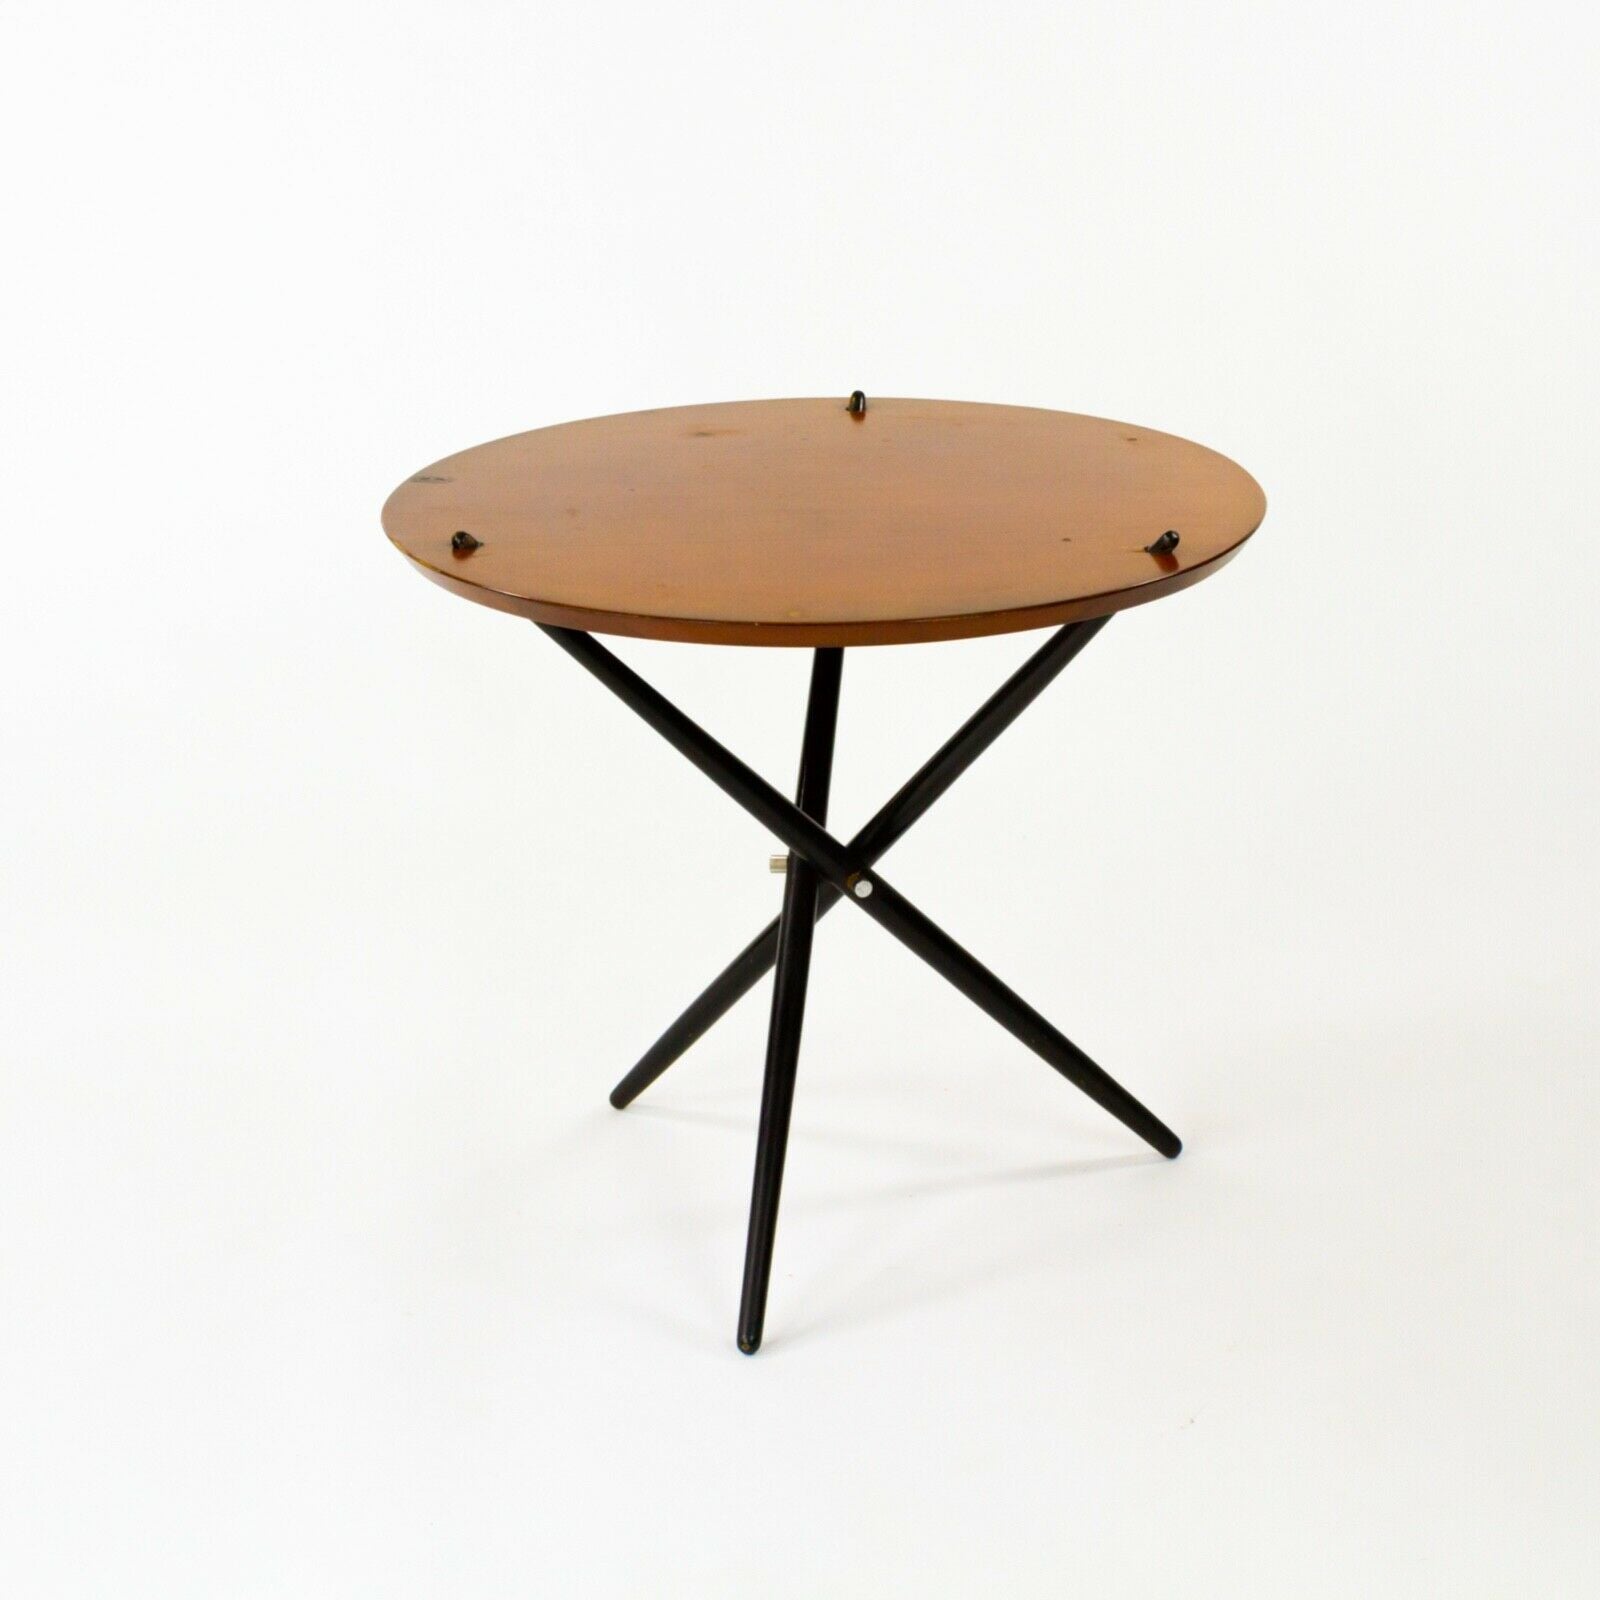 1951 Hans Bellman Small Tripod Table for Knoll Associates No. 103 with 24 in Top